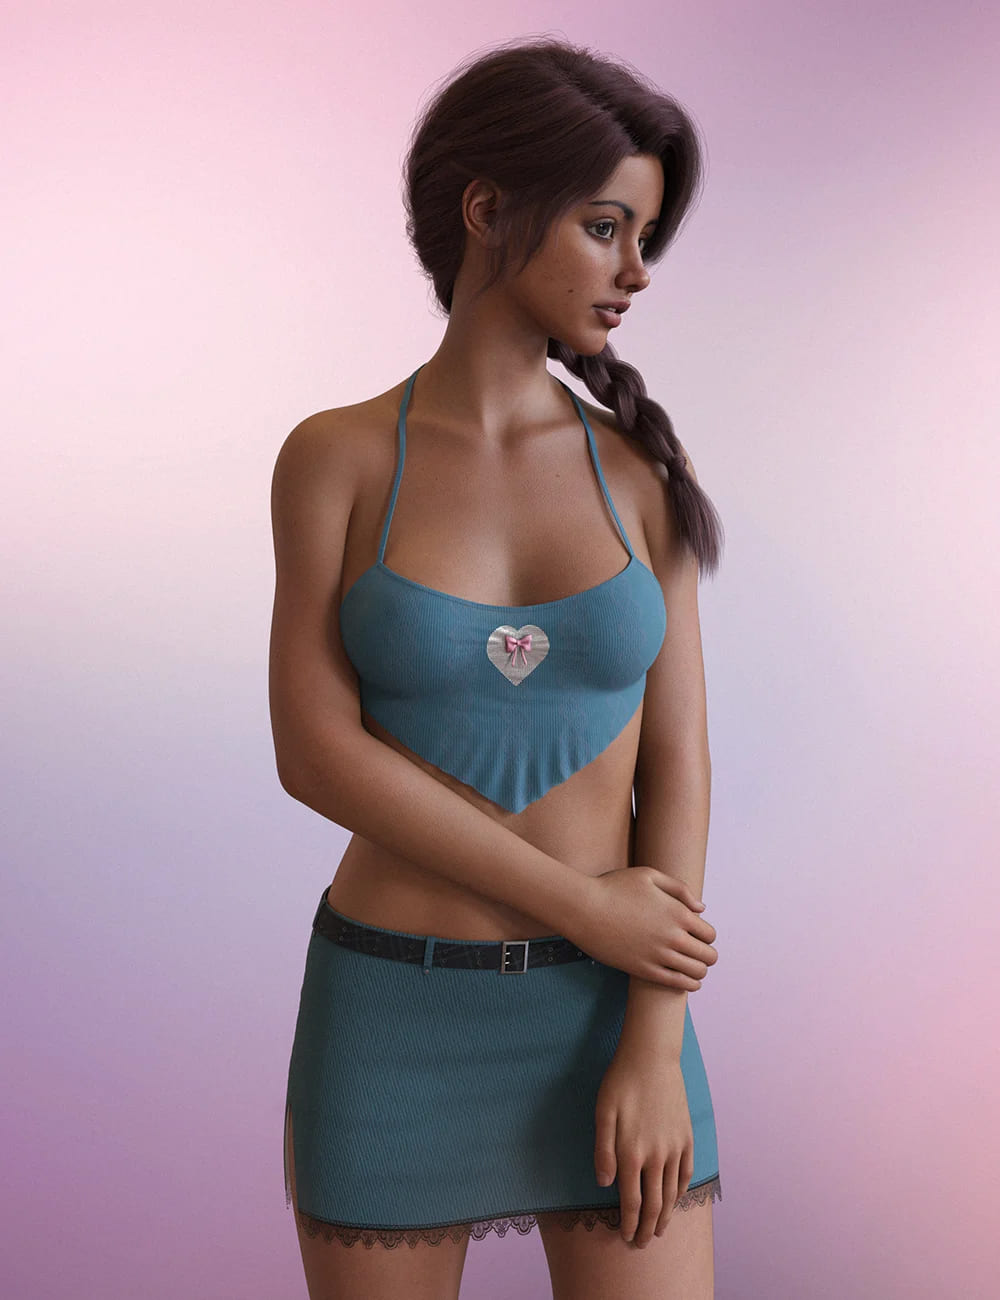 dForce Sweet Summer Breeze Outfit for Genesis 8 and 8.1 Females_DAZ3D下载站